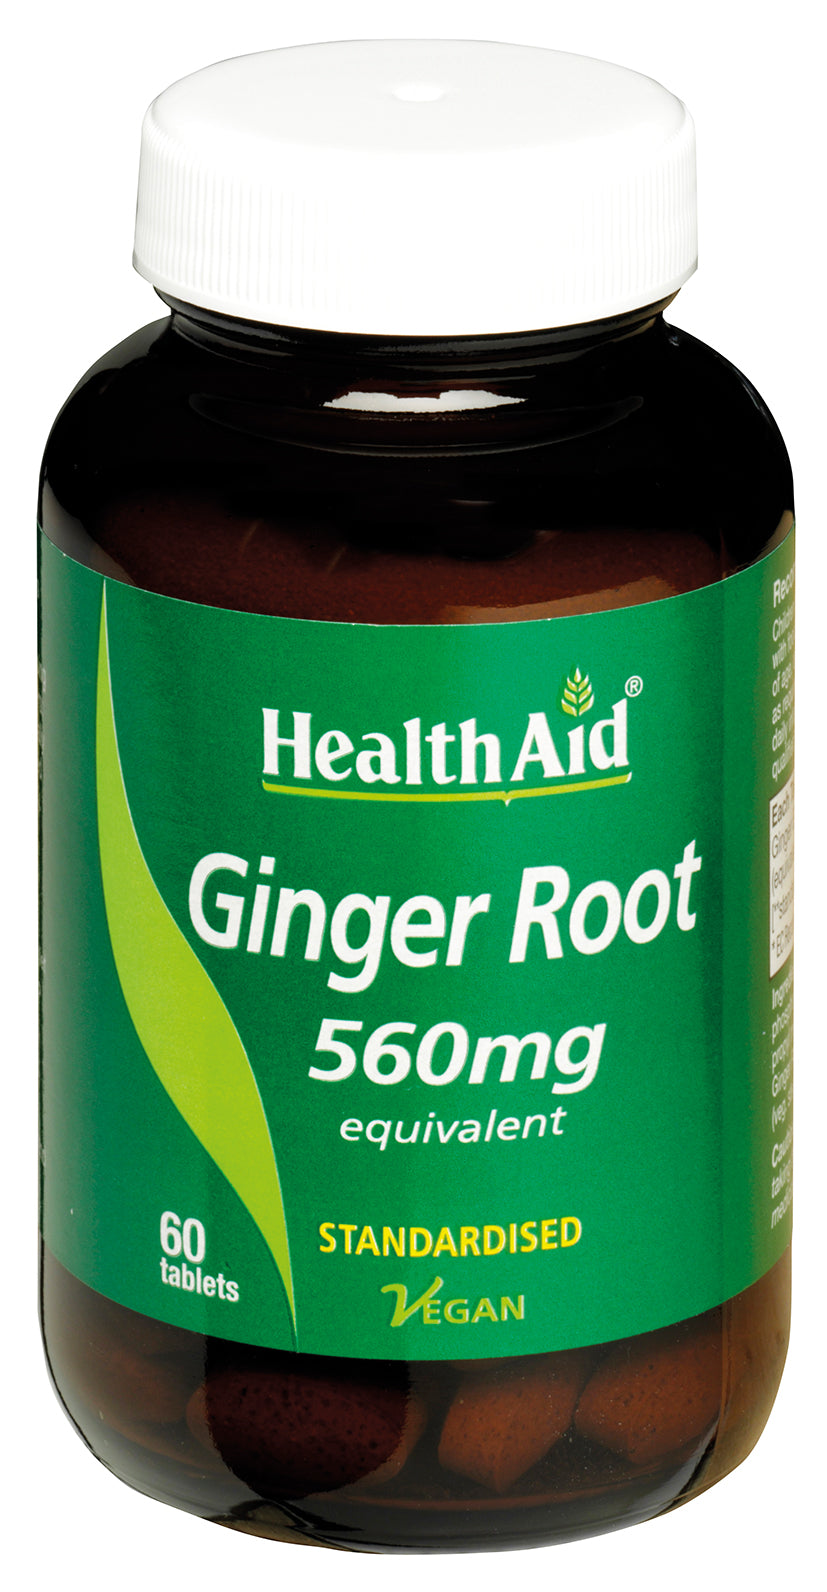 Health Aid Ginger Root 560mg 60's